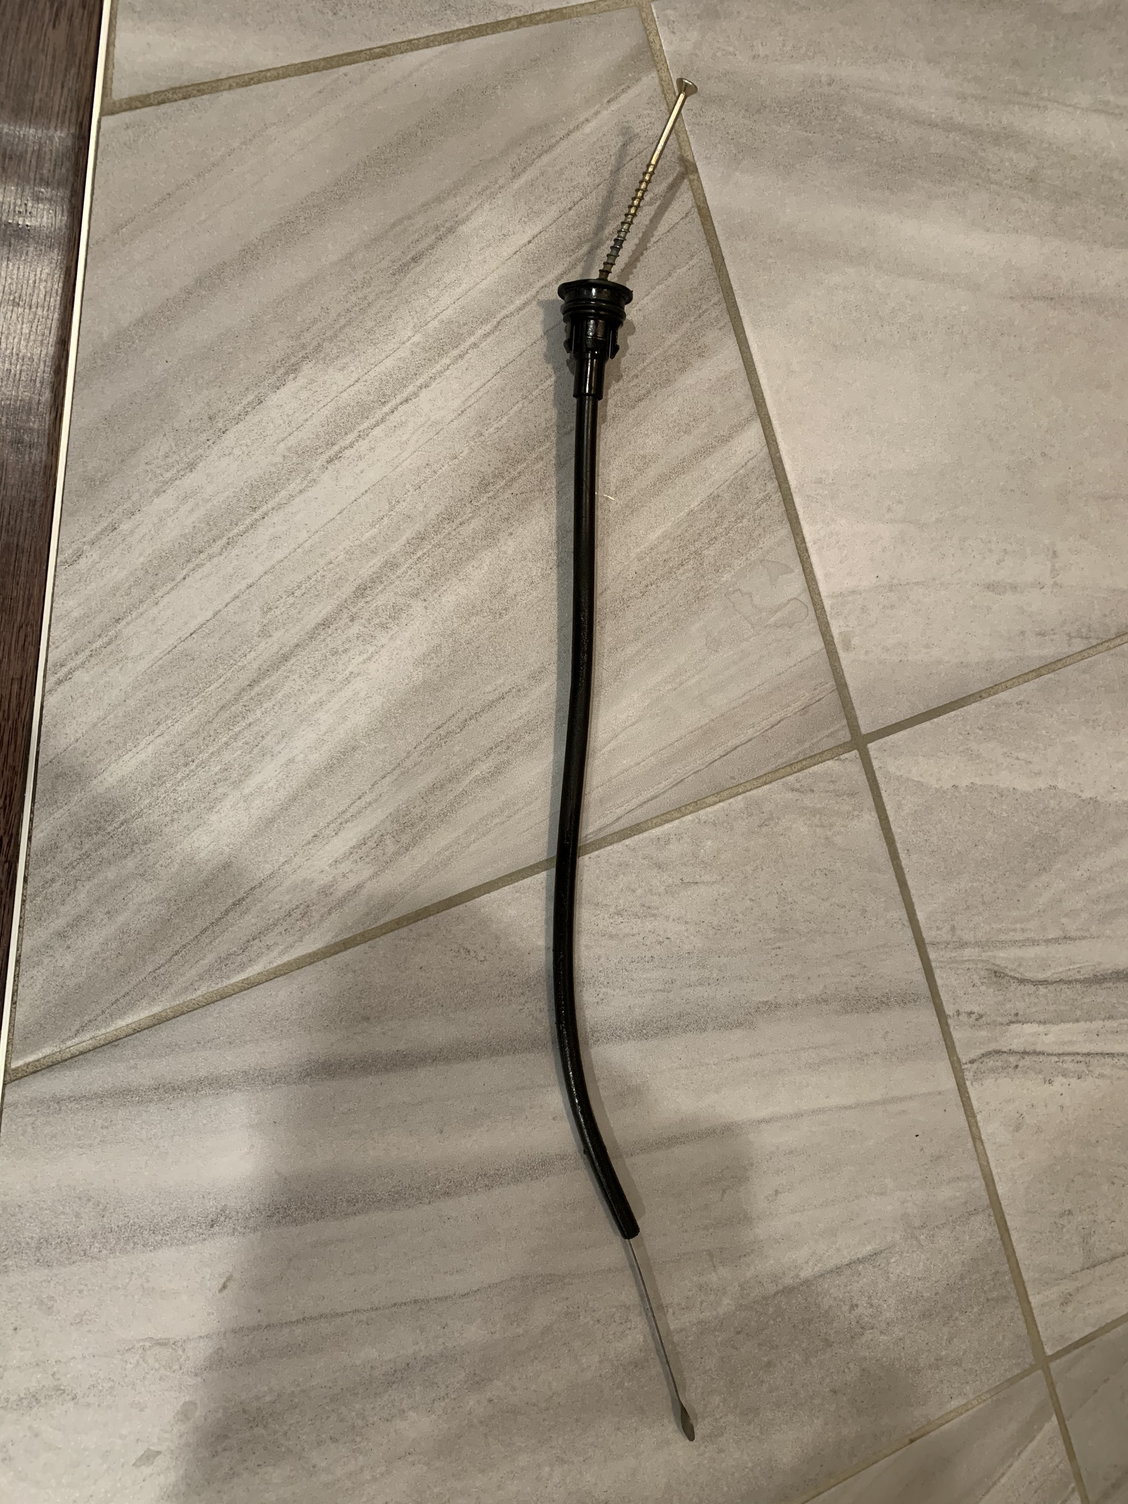 Accidentally pulled out oil dipstick tube - 2014 f150 5.0L - Ford F150 ...